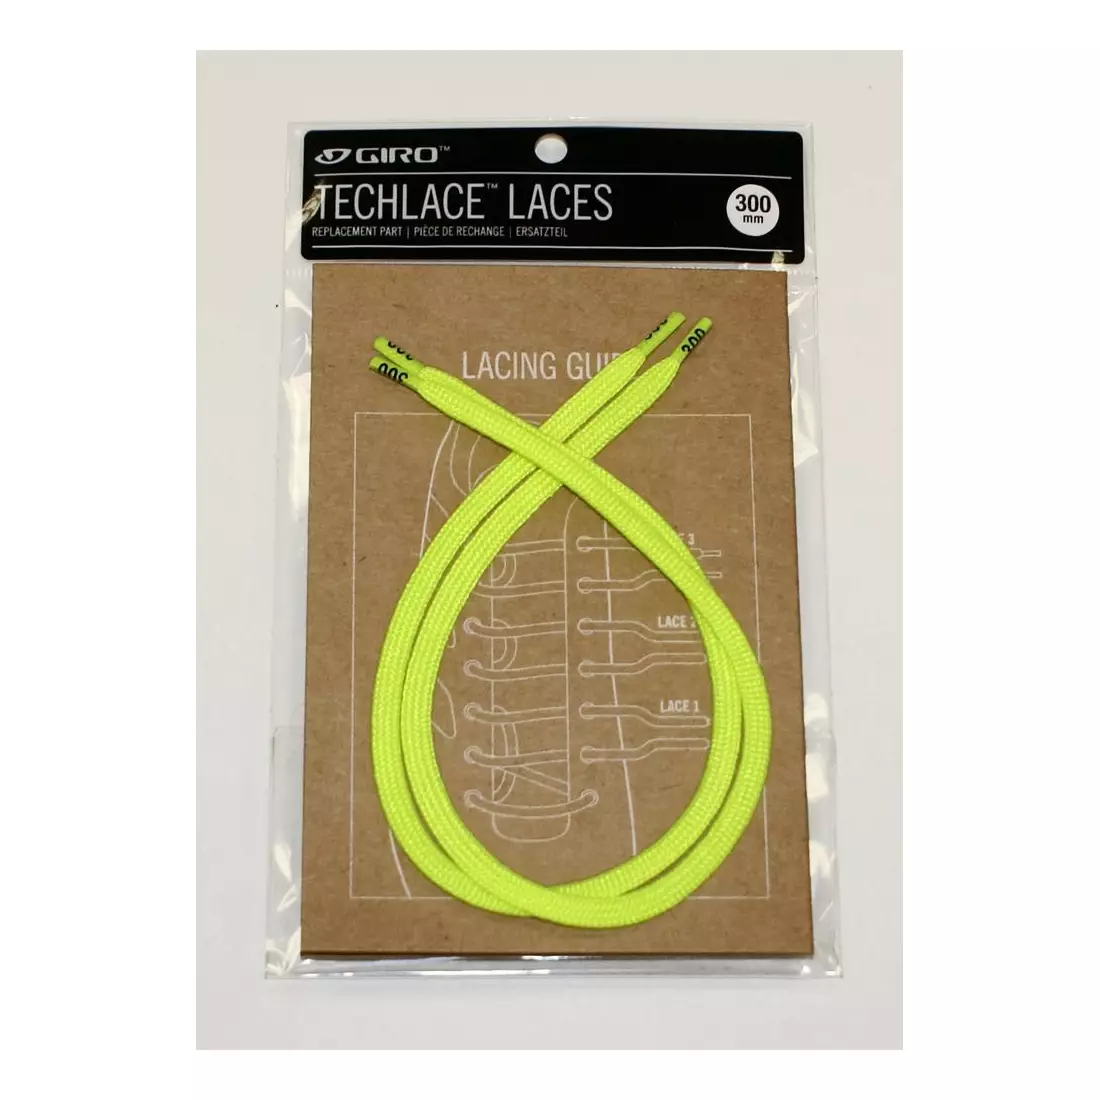 GIRO laces for cycling shoes TECHLACE LACES highlight yellow GR-7093380